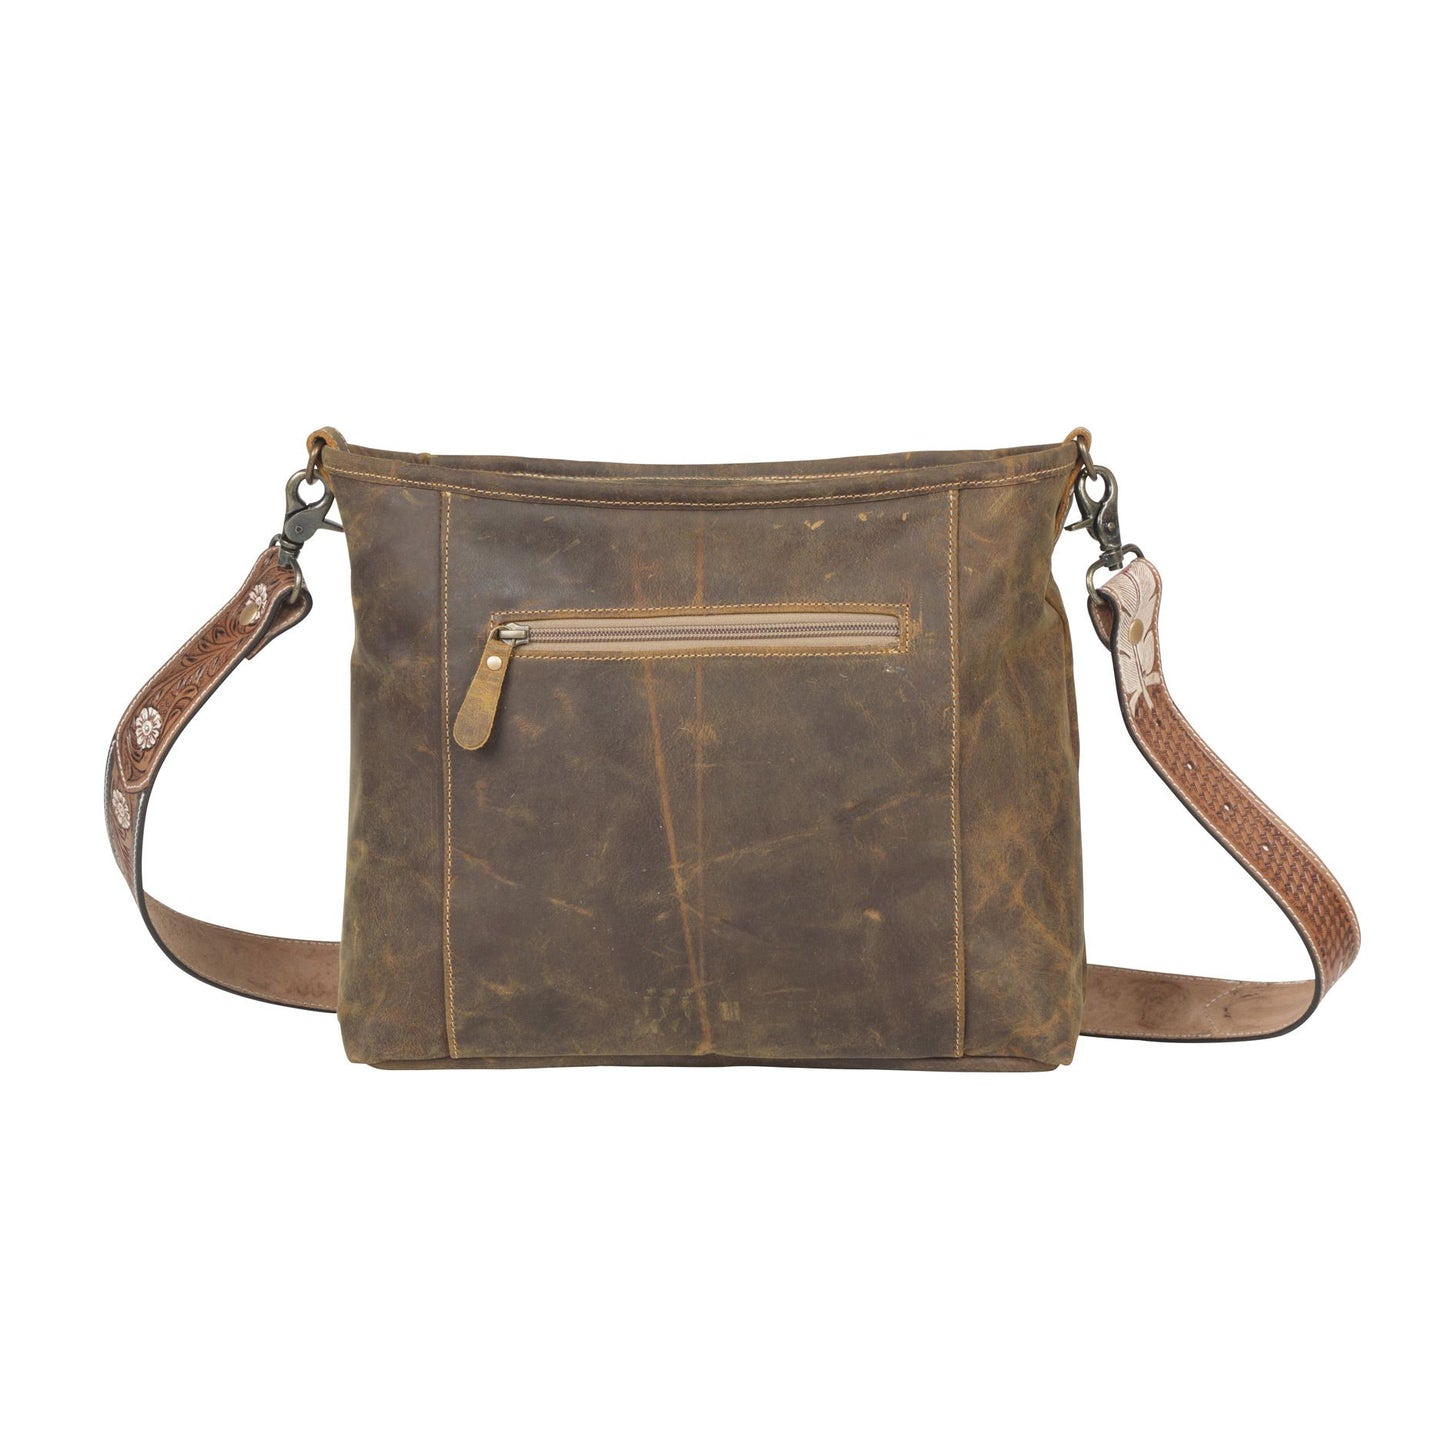 Follow The Herd Leather/Hair-On-Hide Purse